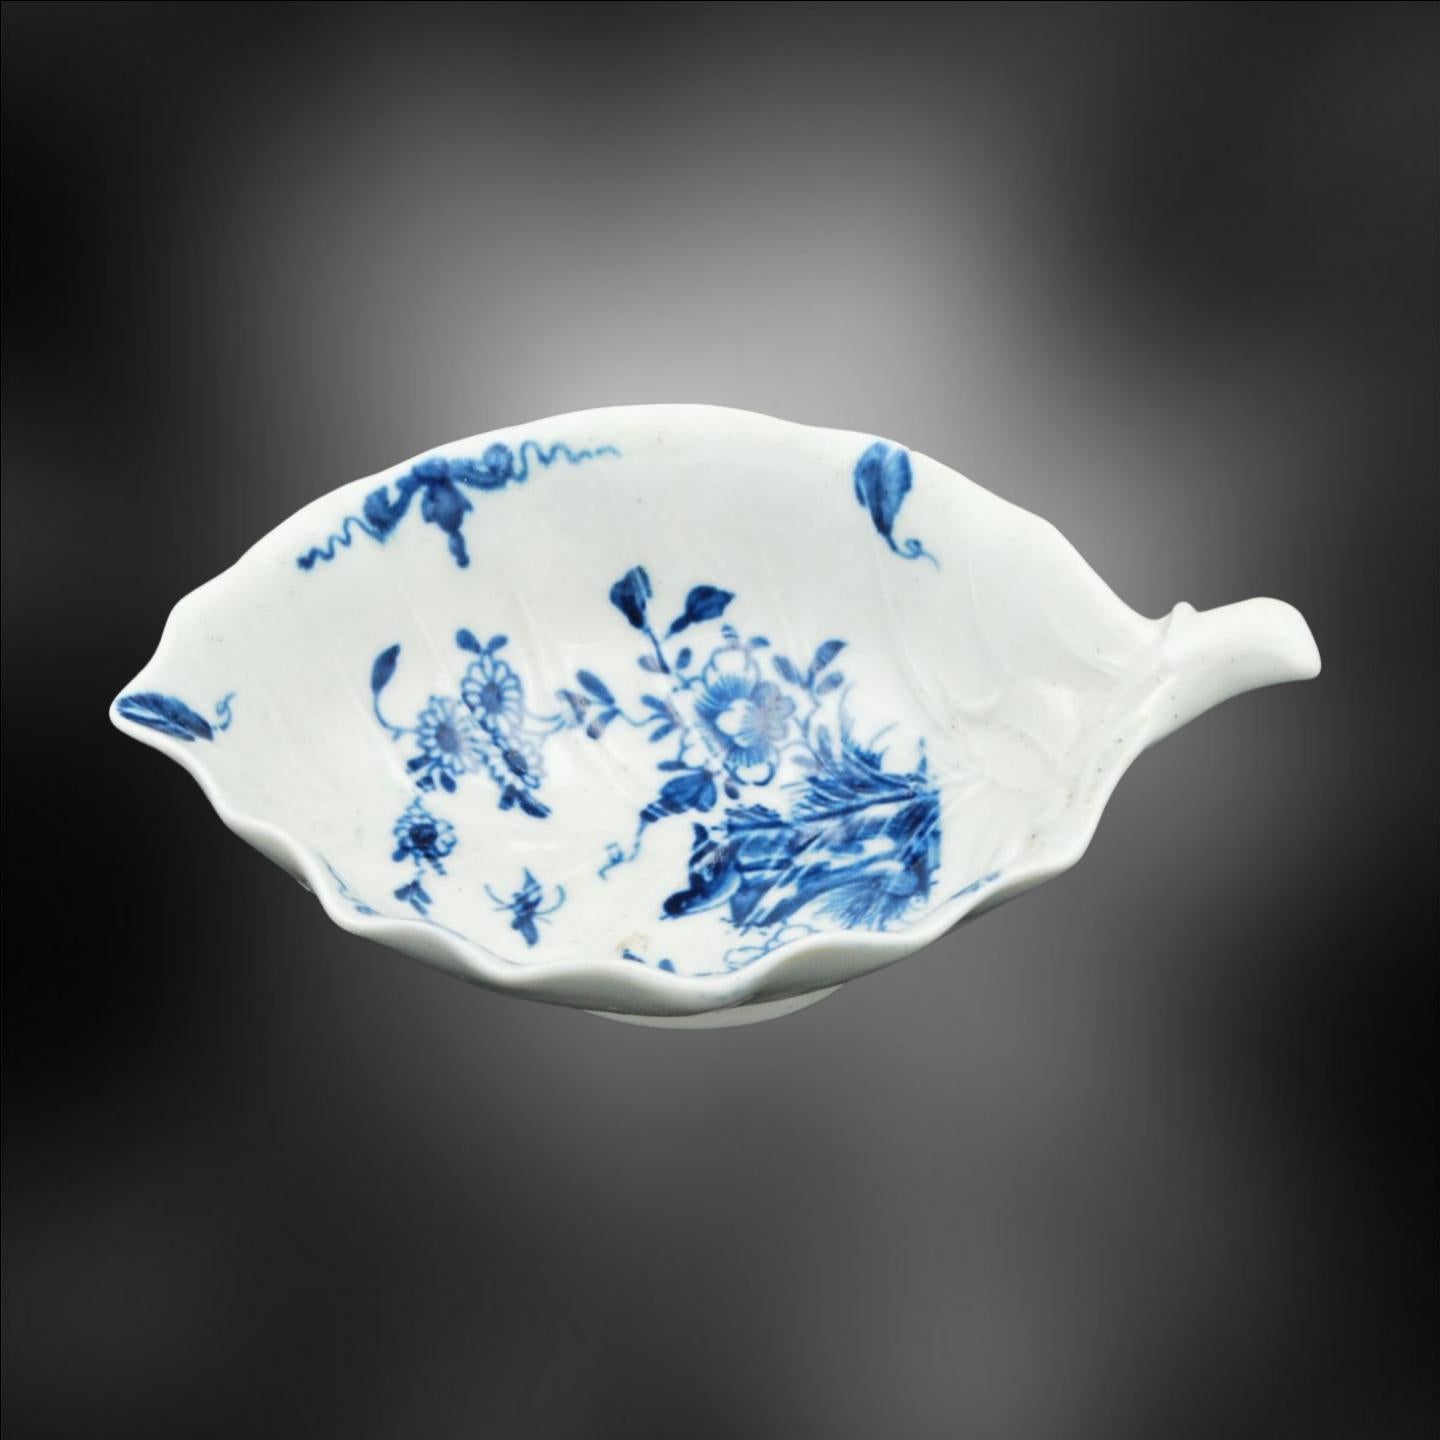 A particularly successful dish, formed in the shape of a leaf, and decorated with underglaze blue painting after the Chinese.

The Two Peony Rockbird pattern is a traditional Chinese decorative design that has been used in various forms of art and